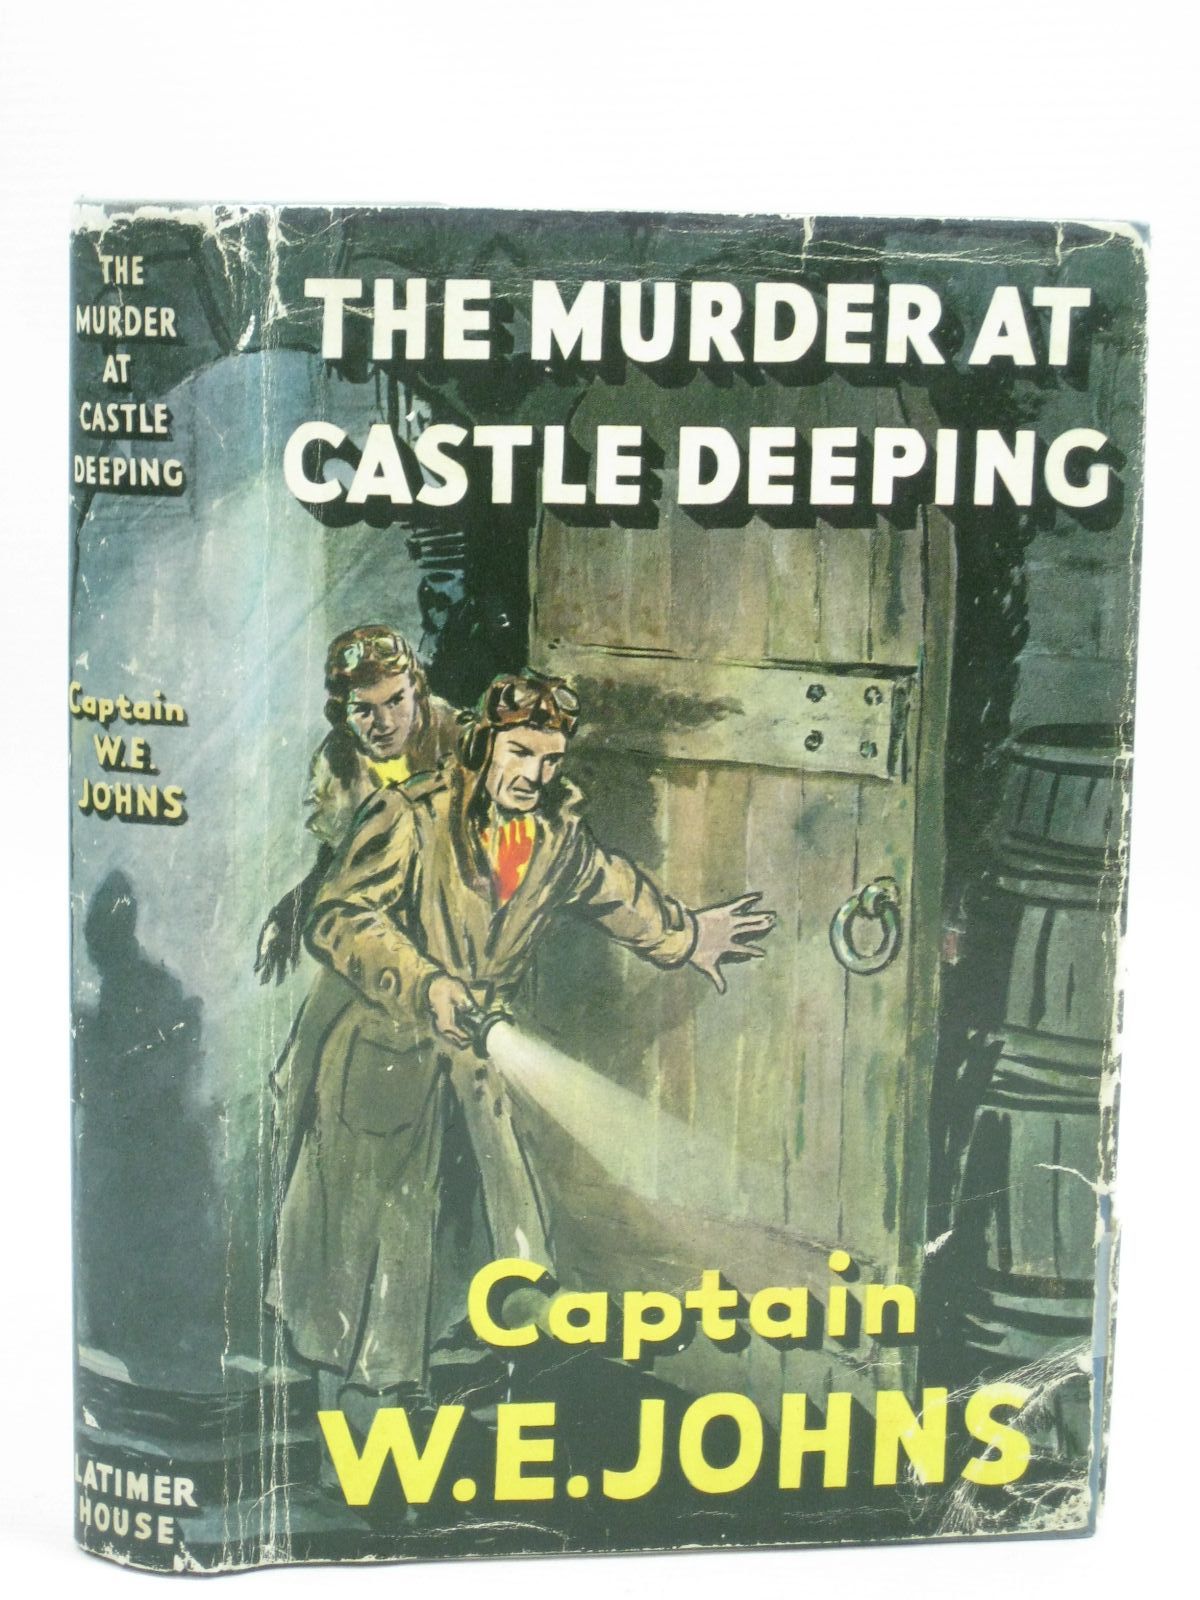 Cover of THE MURDER AT CASTLE DEEPING by W.E. Johns